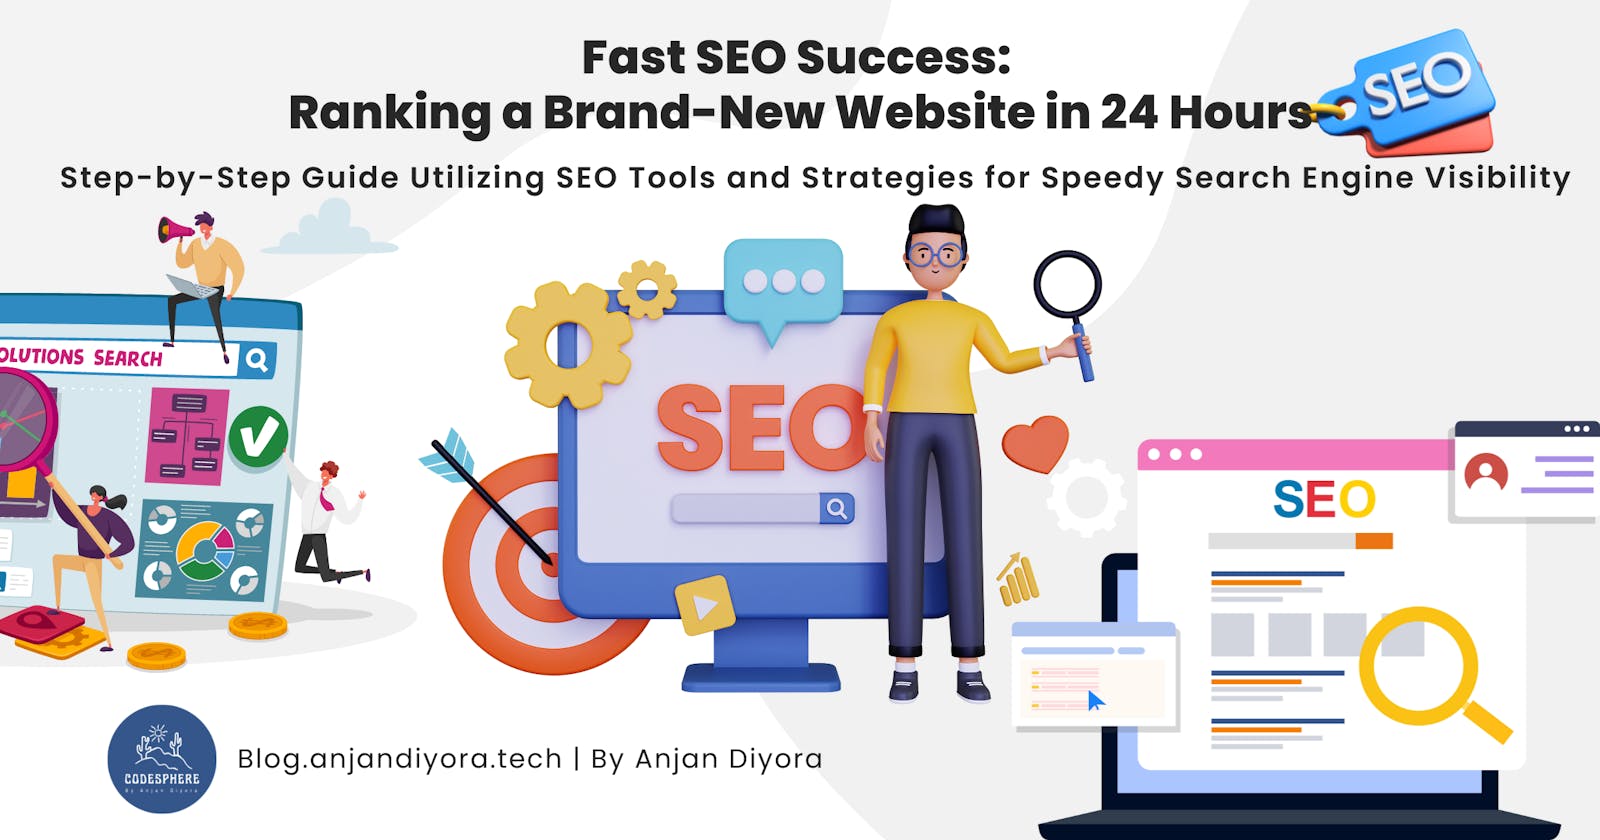 Fast SEO Success: Ranking a Brand-New Website in 24 Hours